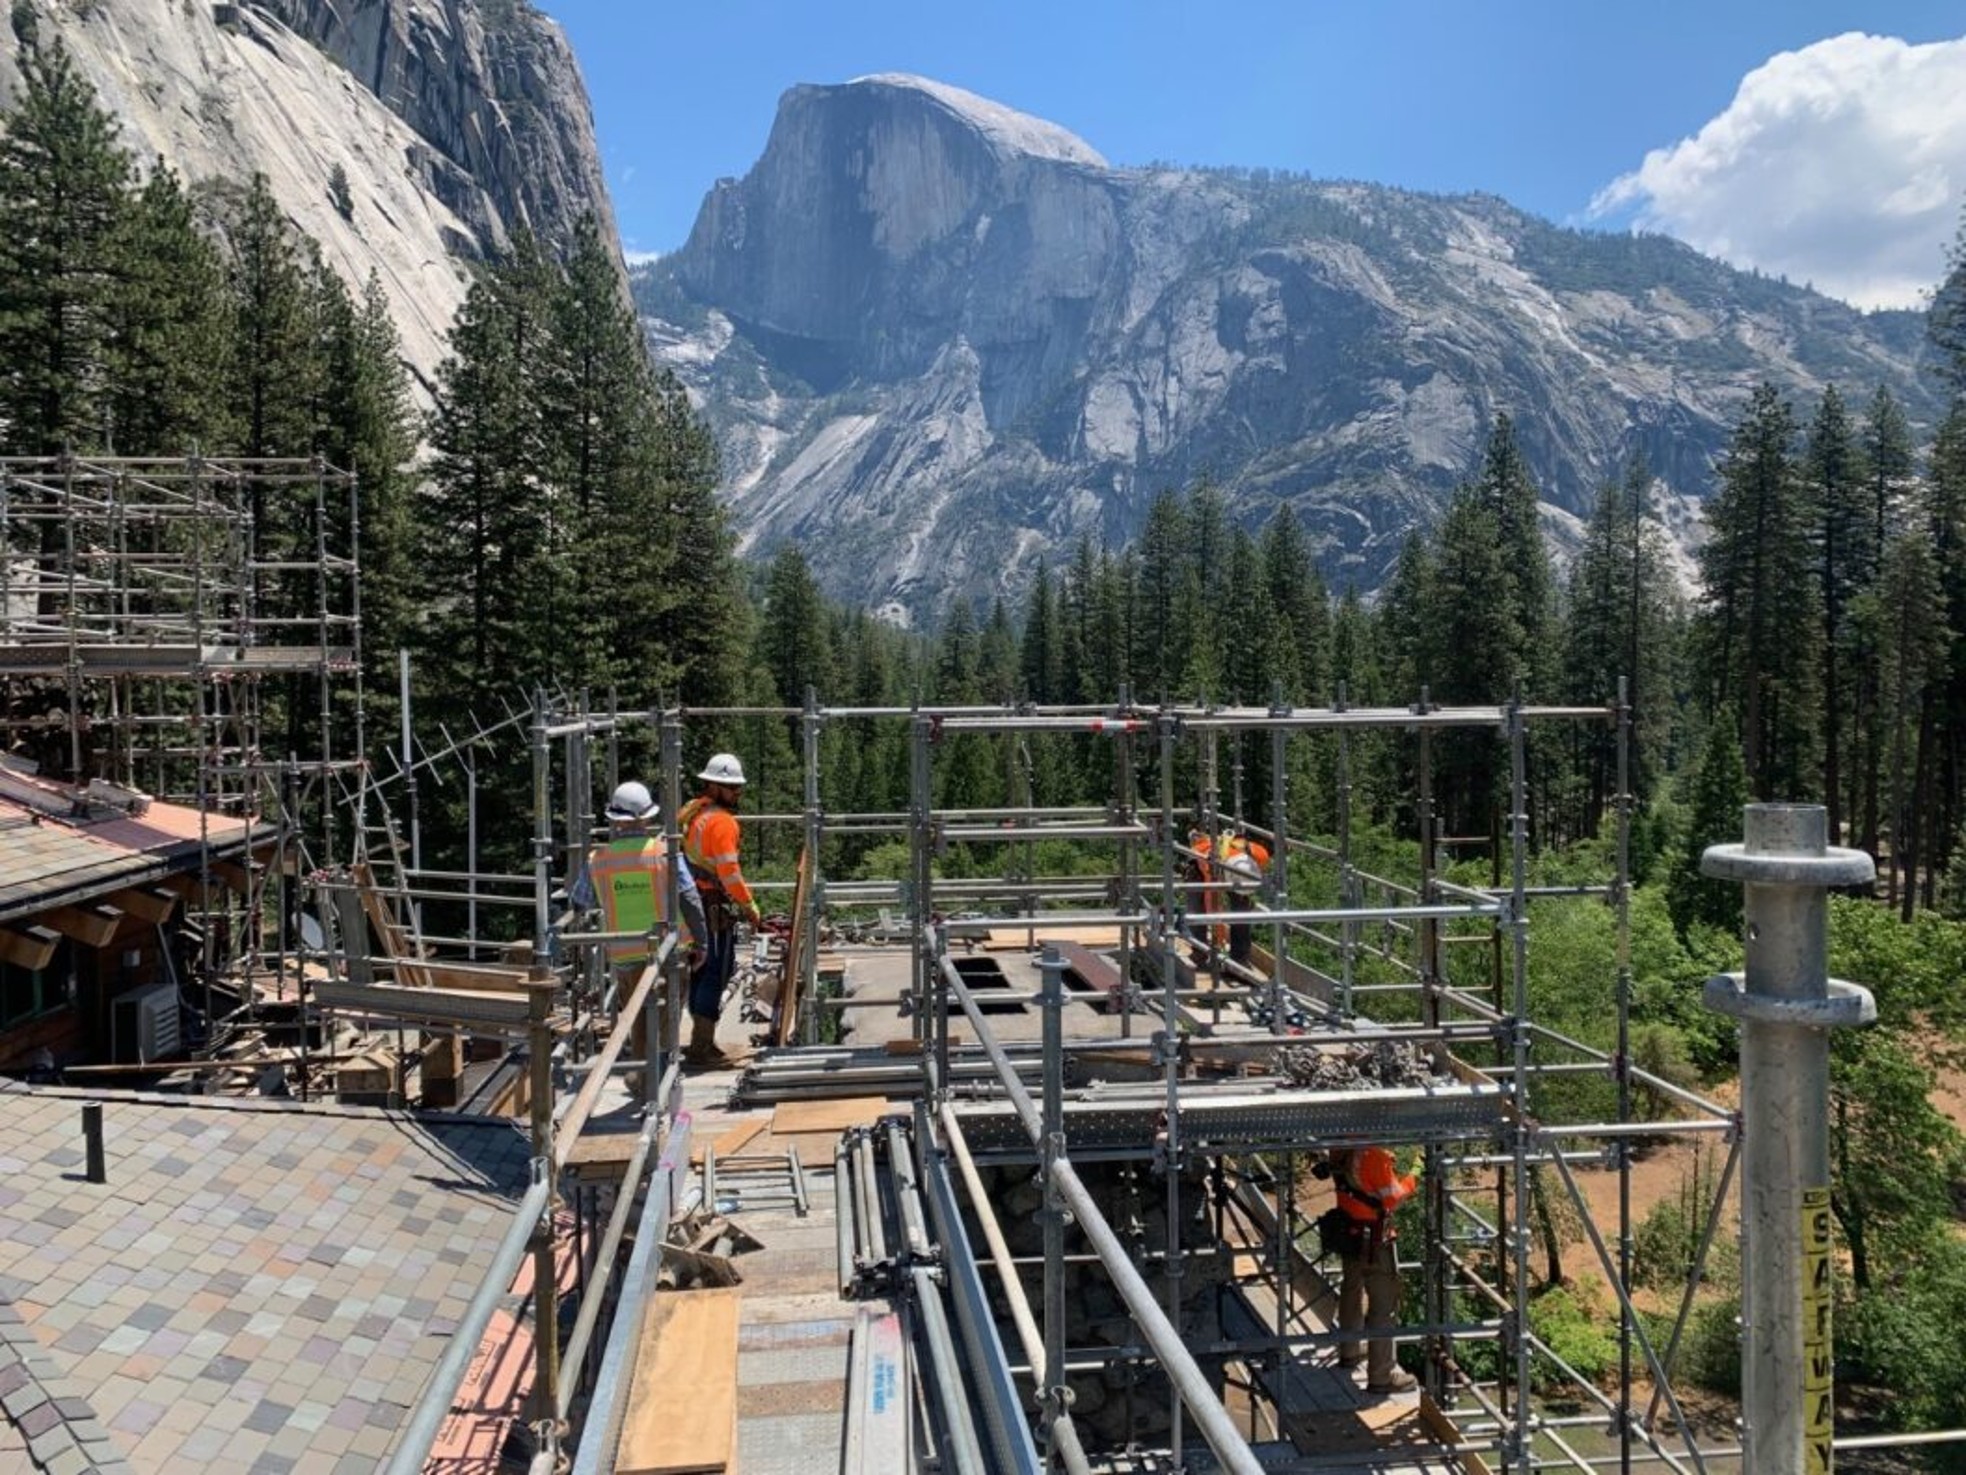 Scaffolding surrounds the exterior of the Ahwahnee Hotel with Half Dome in the background.